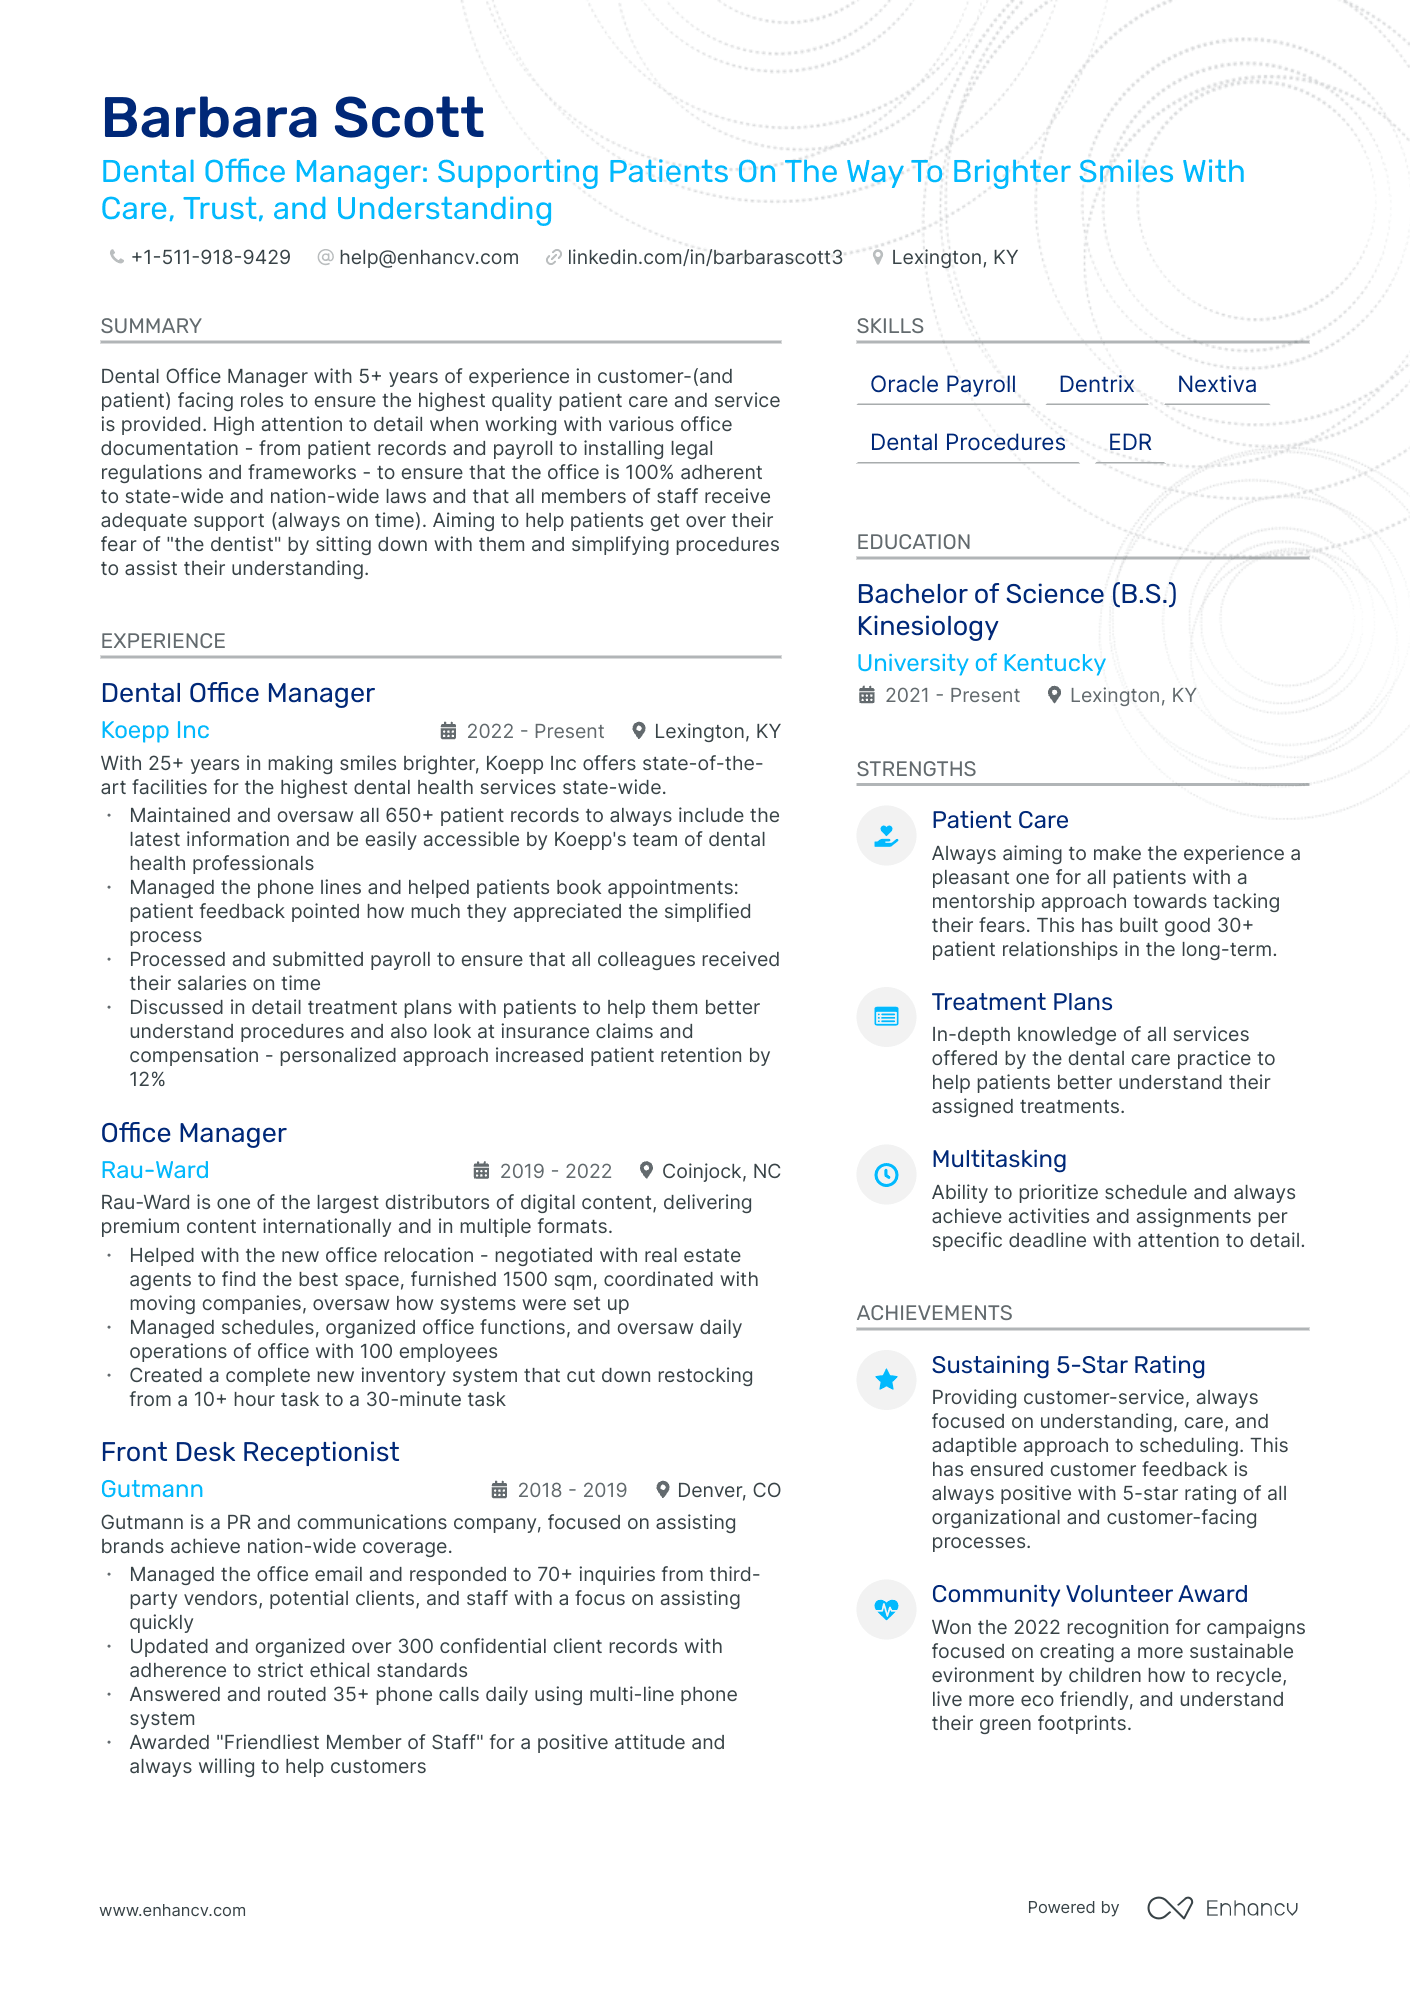 Dental Office Manager resume example